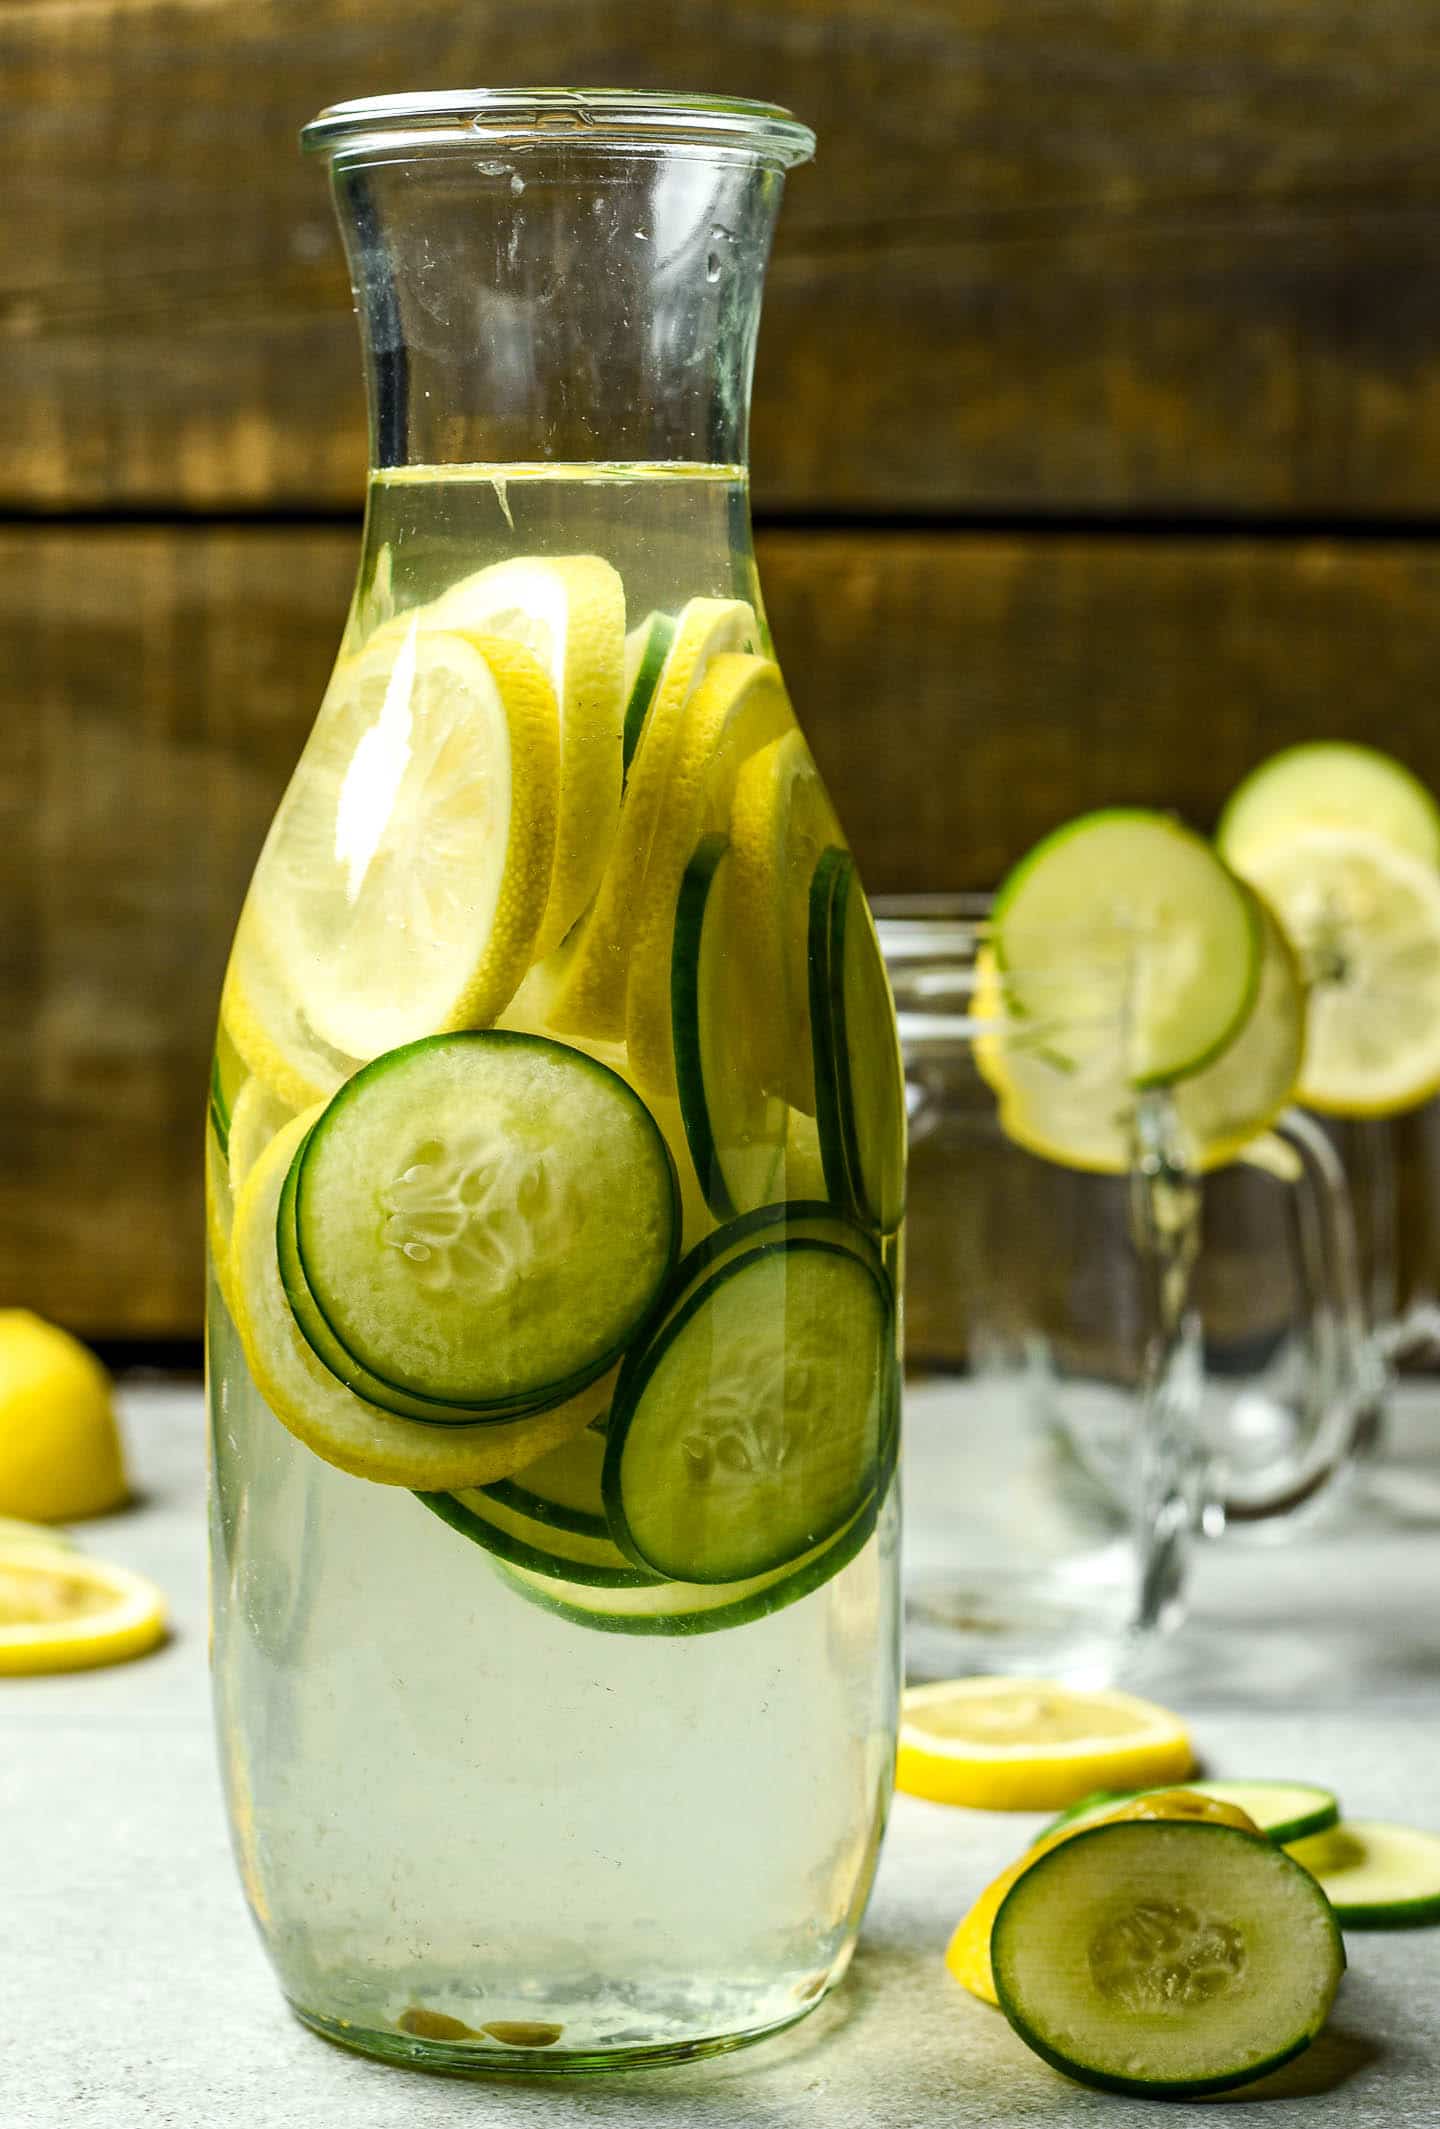 Deliciously refreshing lemon cucumber water made with only lemons, cucumbers, and water. Garnish with fresh mint or berries of your choice. Perfect day or night.